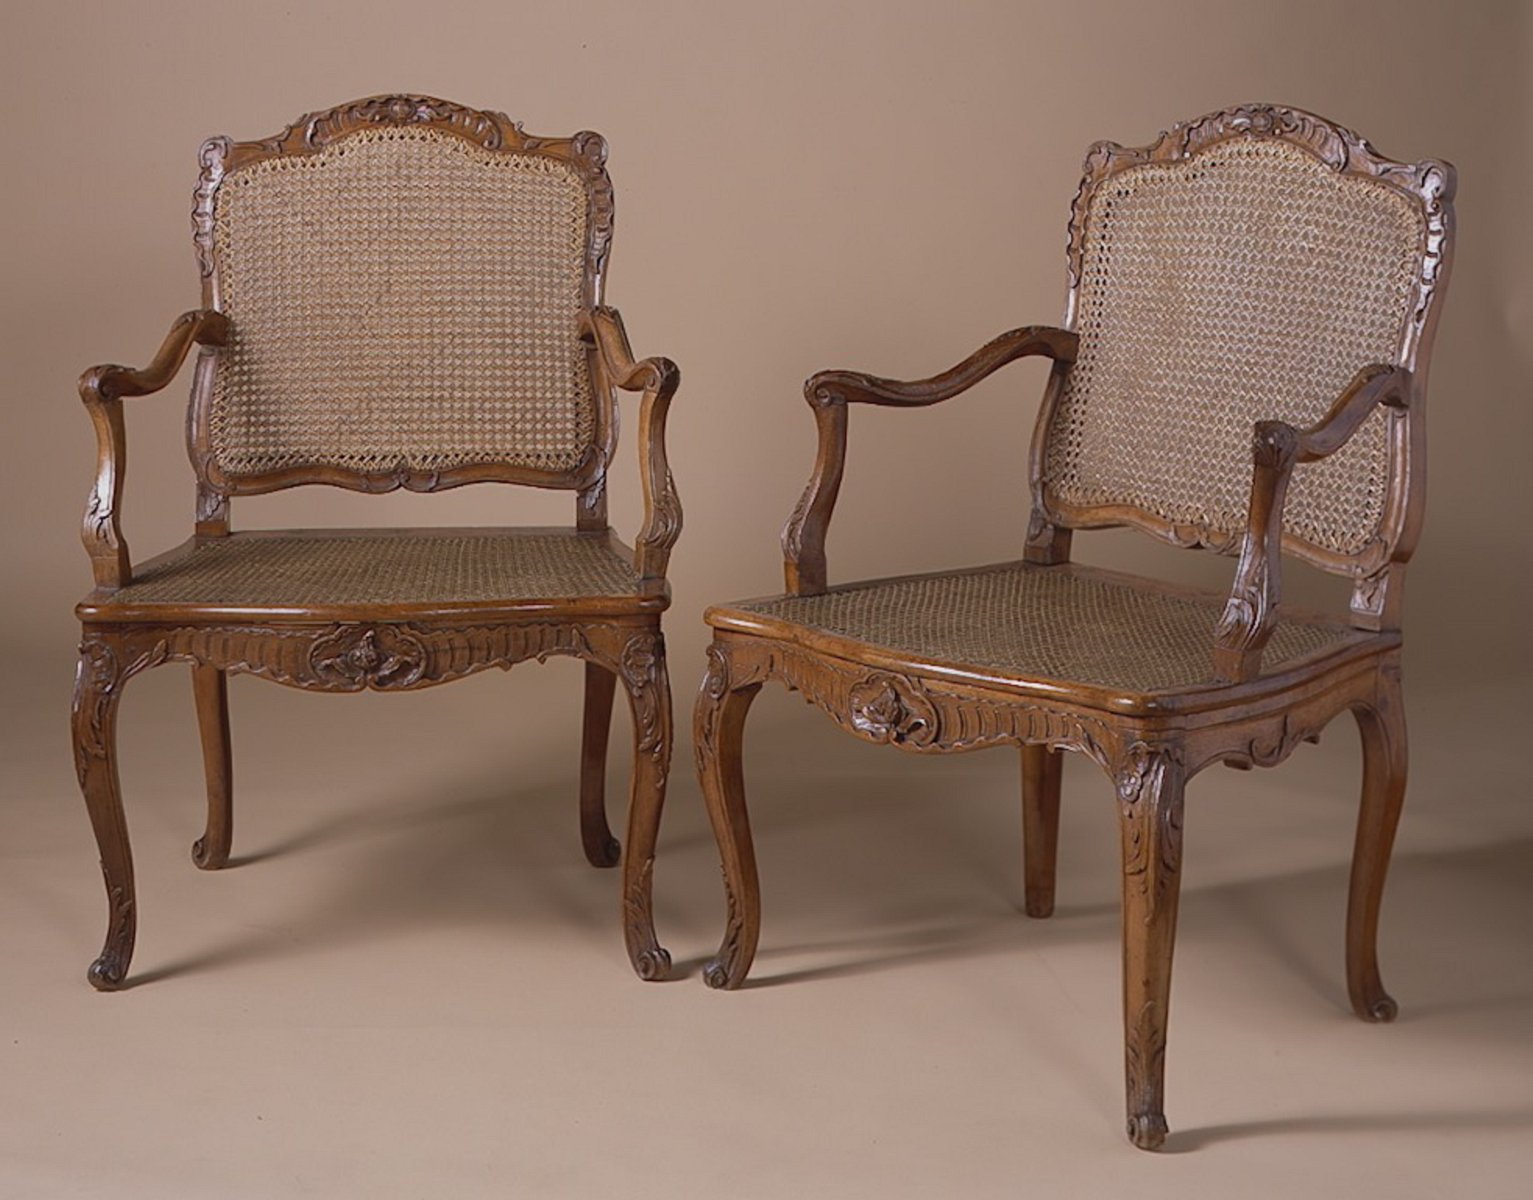 Pair of French Louis XV Period, Beechwood Fauteuils with Cane Seats Stamped, “Cressonlaine”